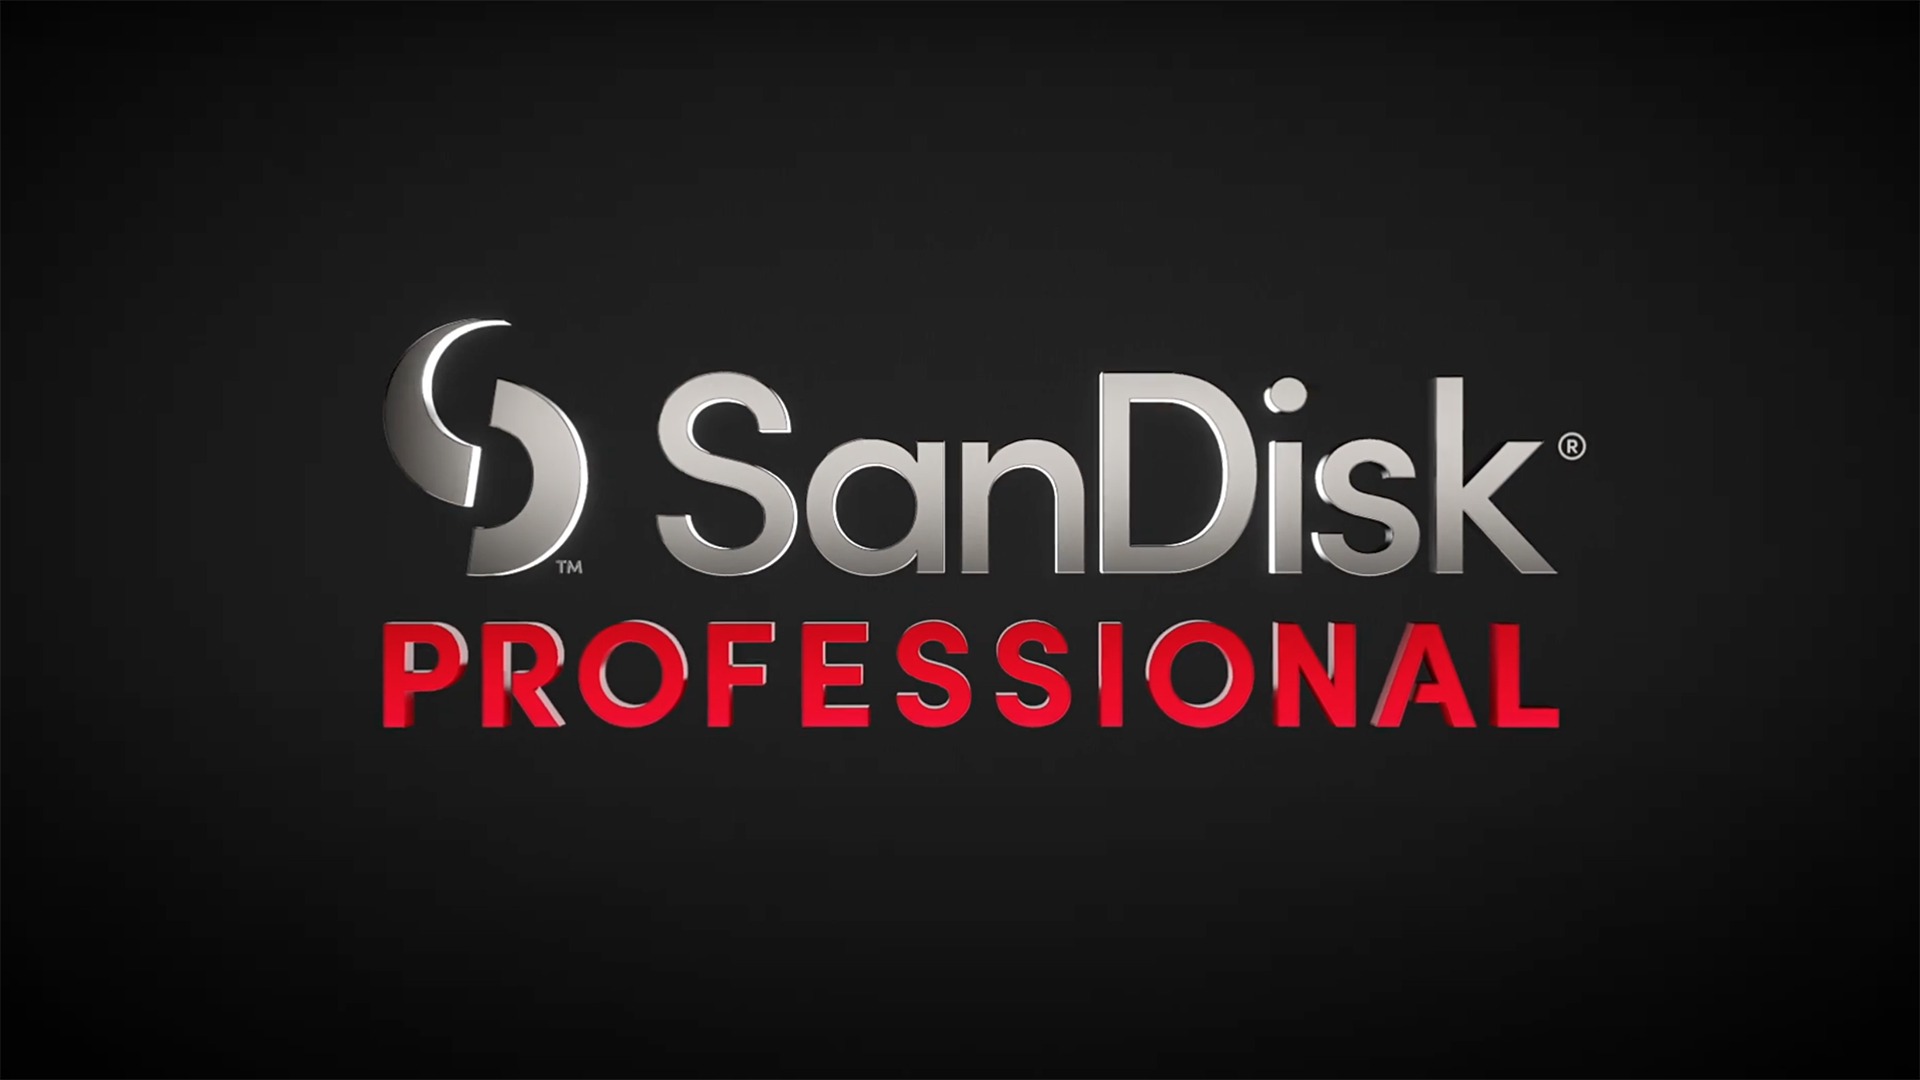 G-Technology becomes SanDisk Professional, New Products Added | CineD